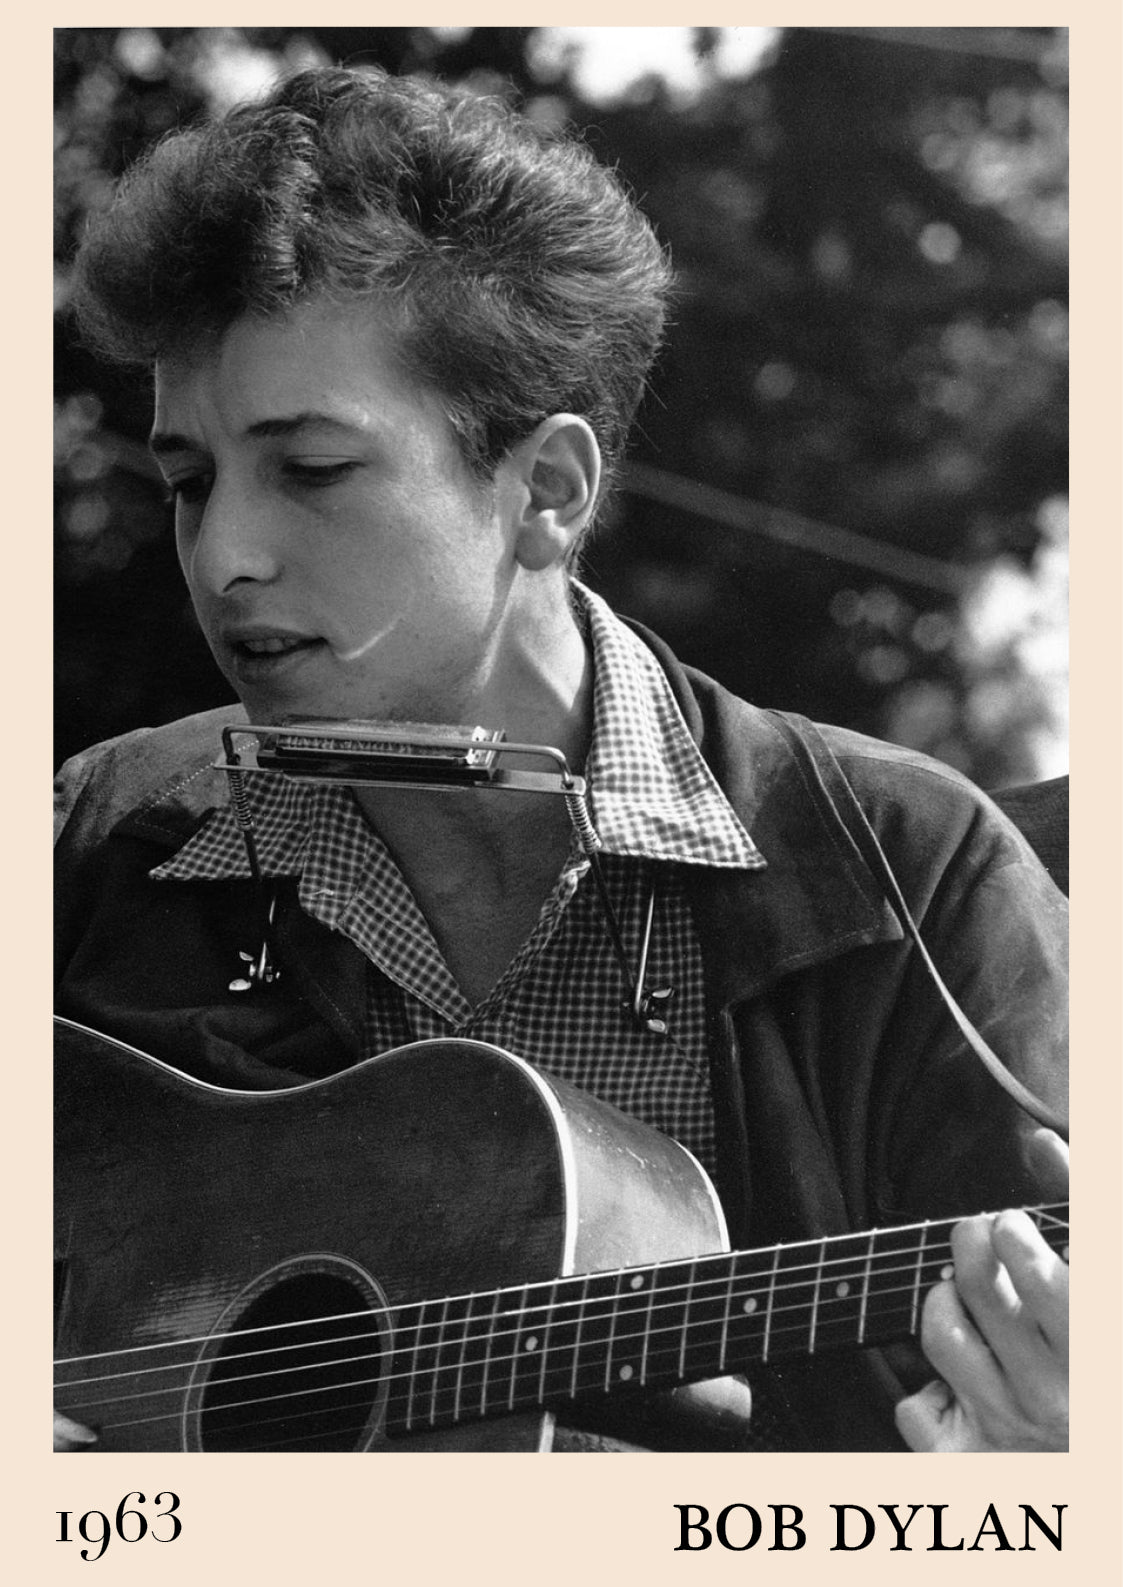 1963 photograph of Bob Dylan playing blues guitar.Crafted into cool blues poster.